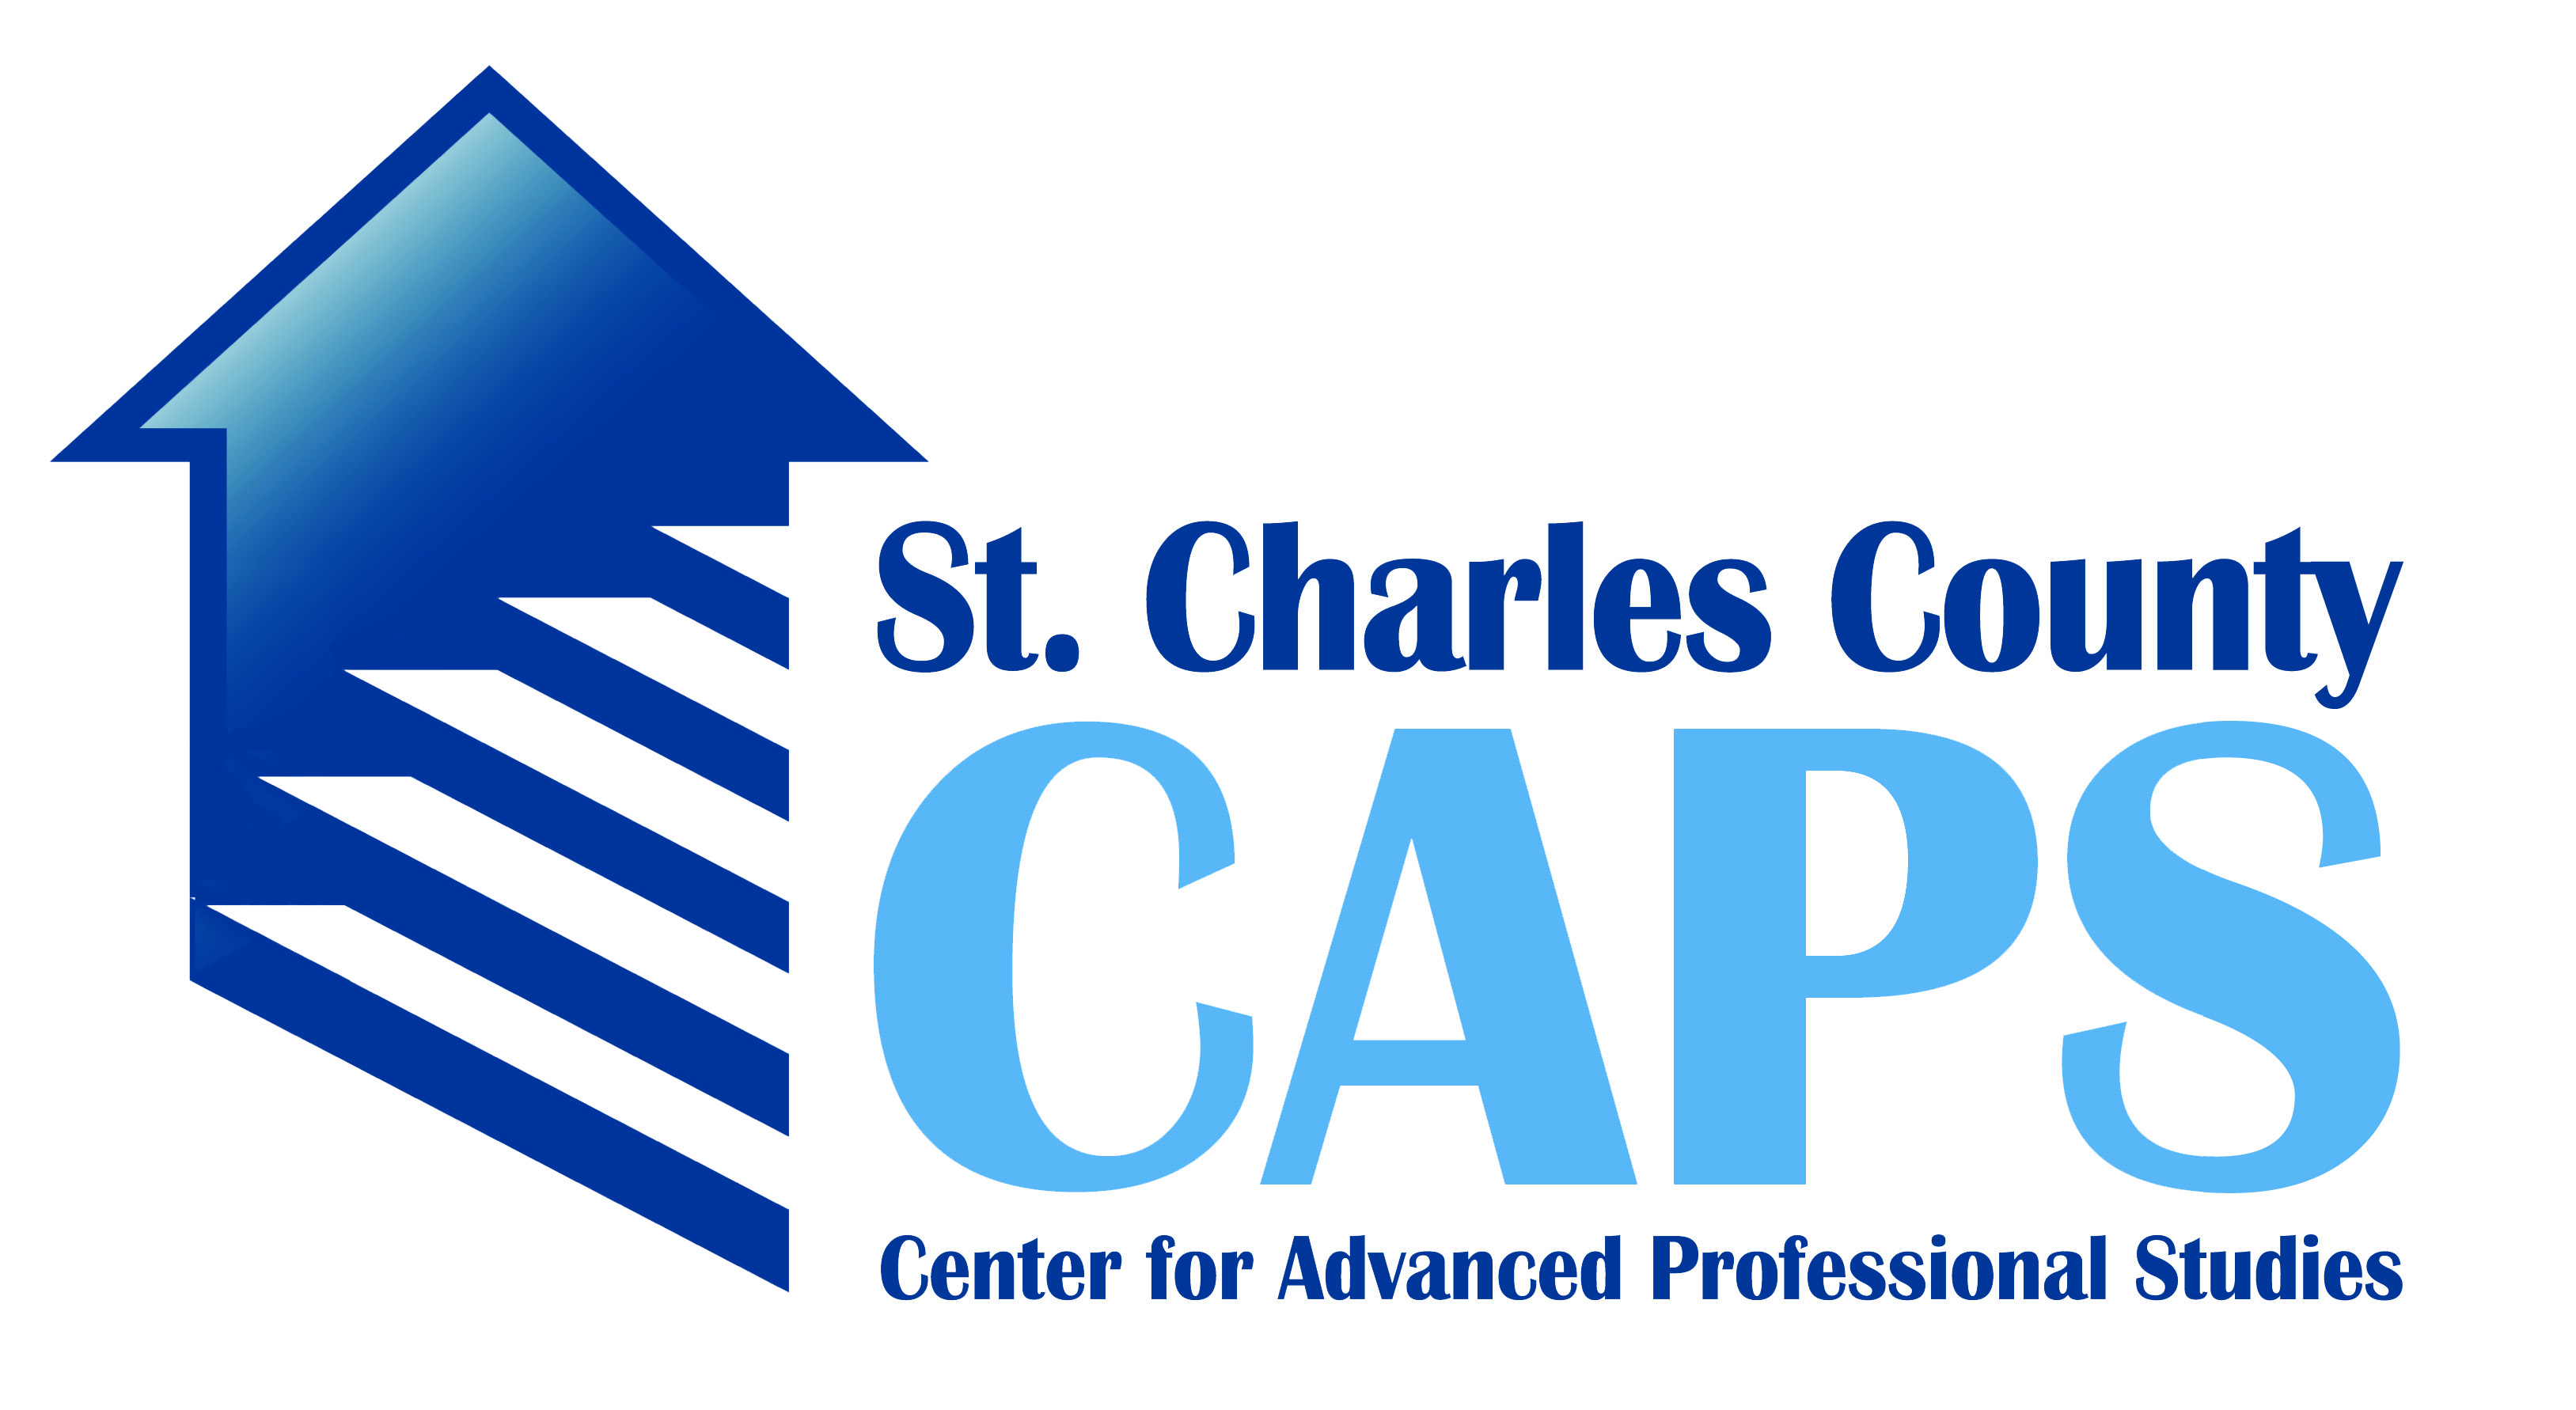 Centers for Advanced Professional Studies